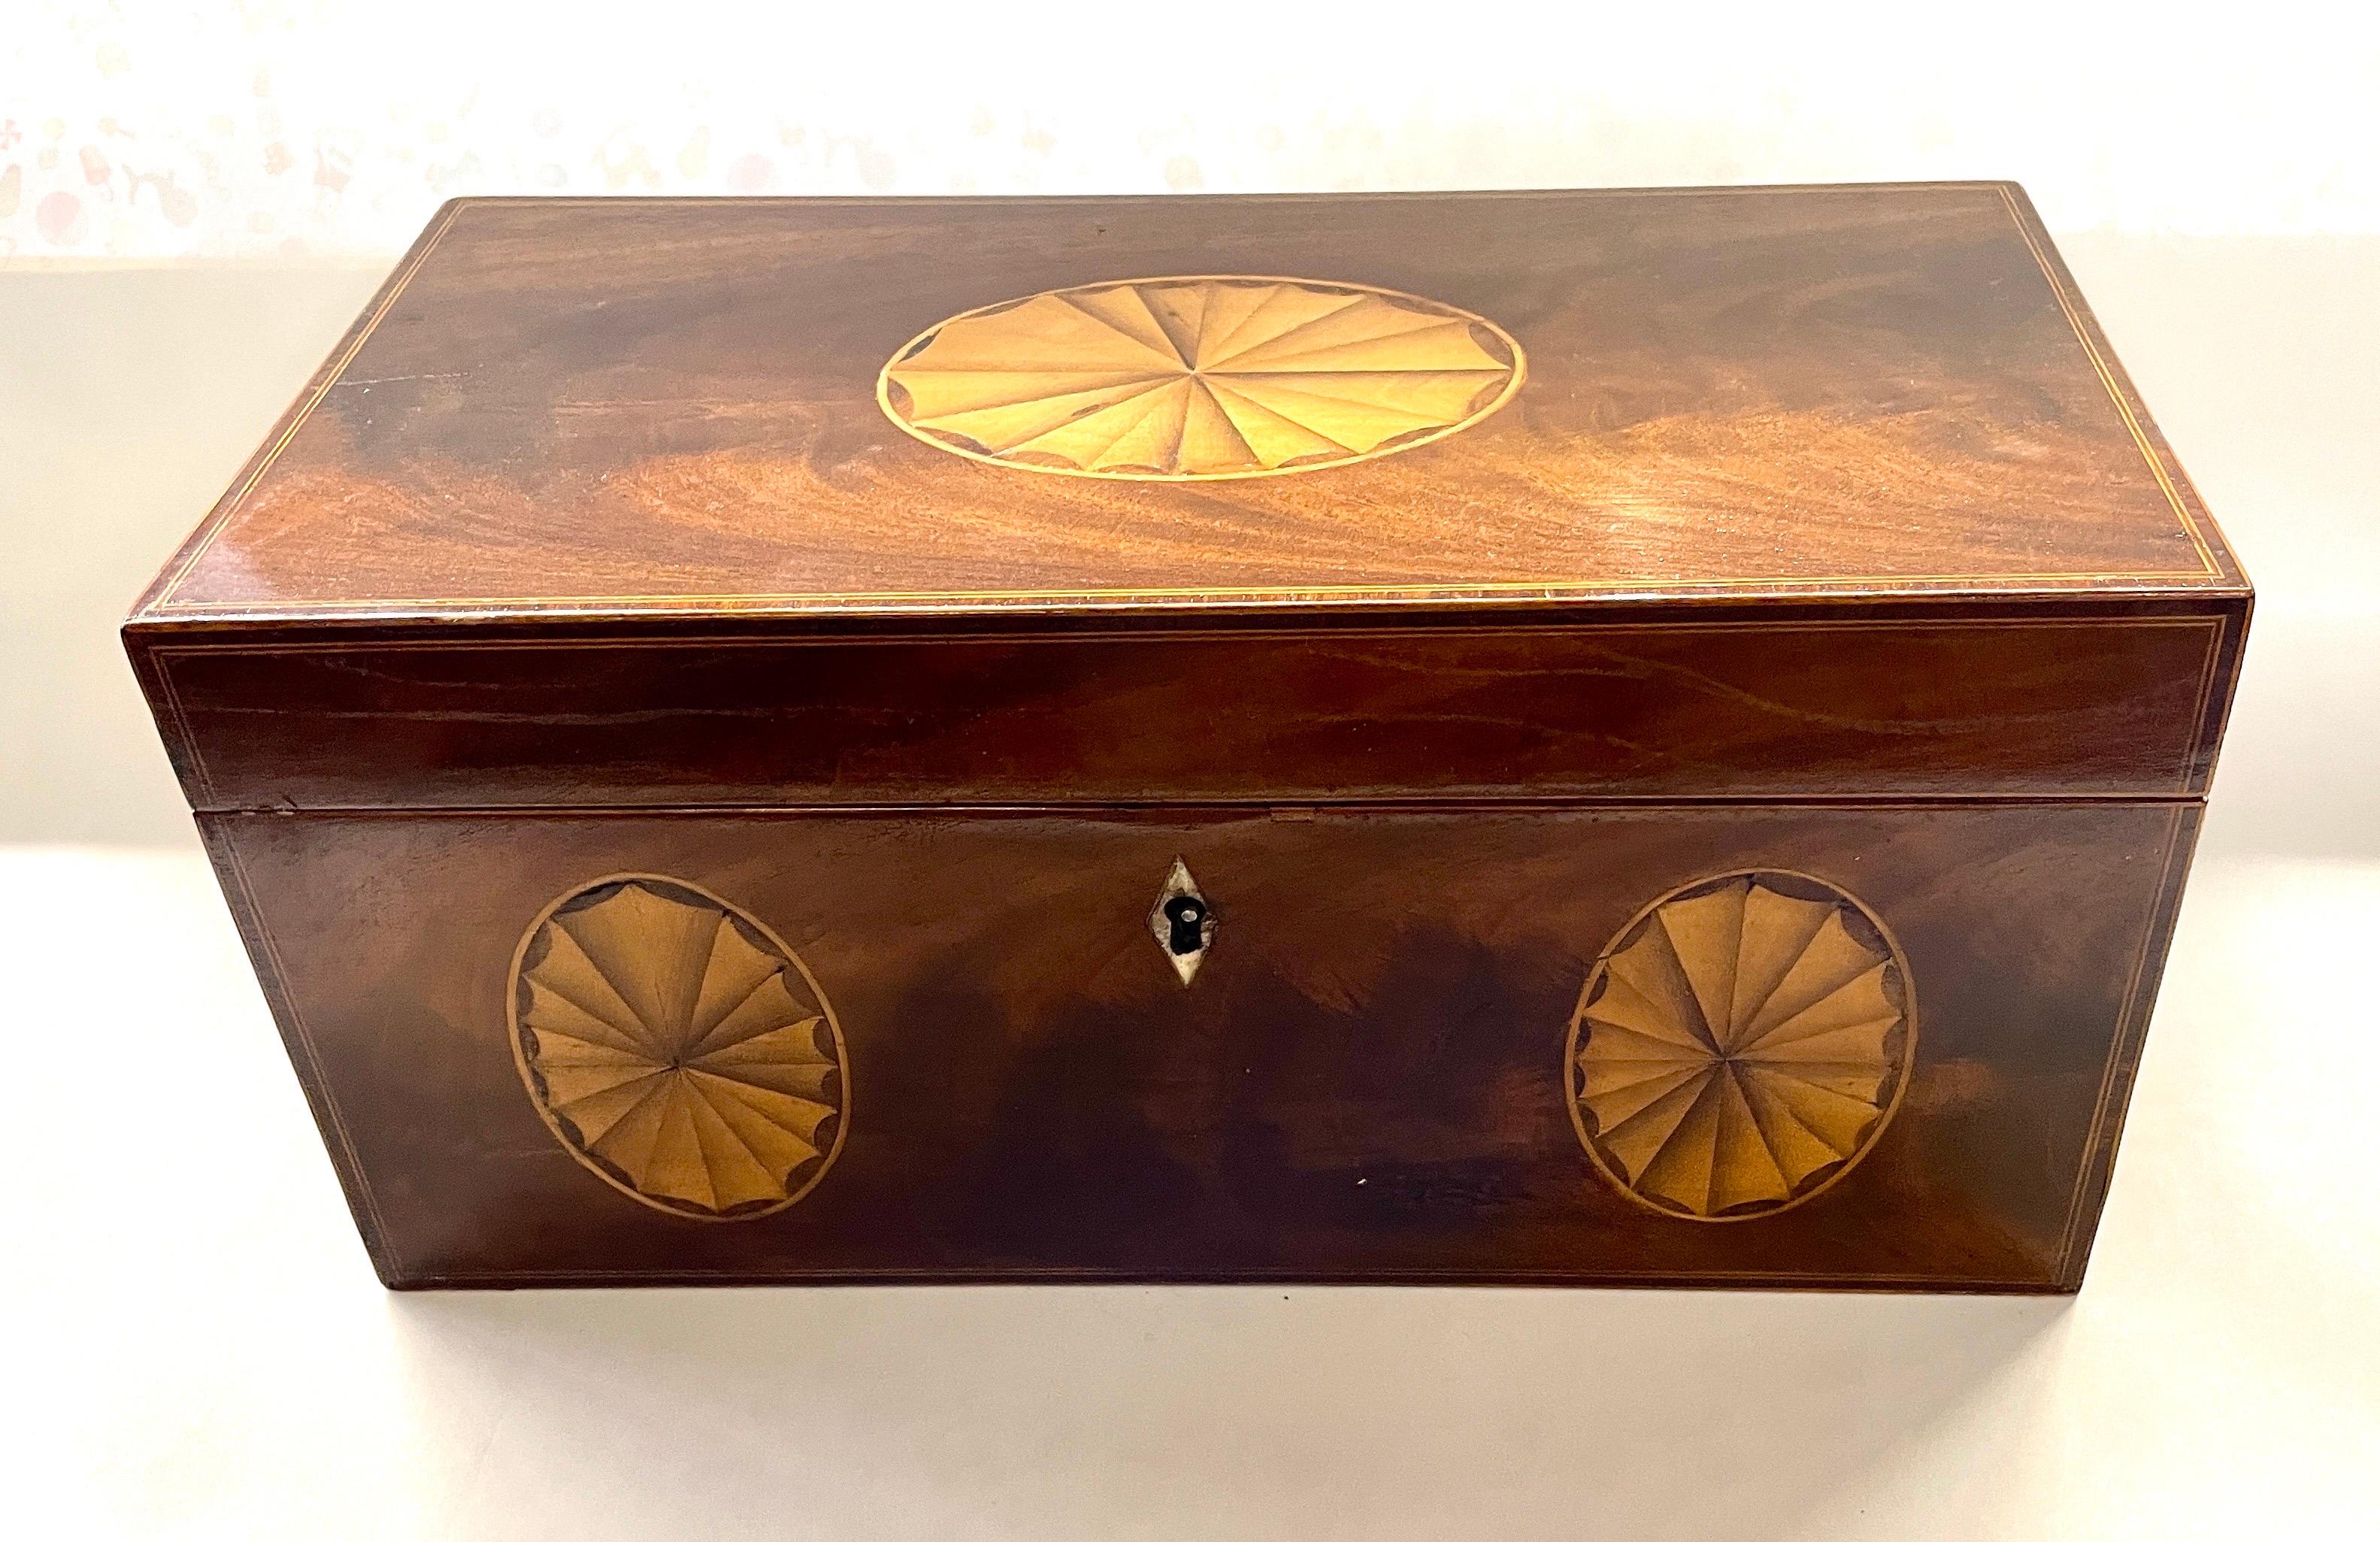 A Most Fabulous Antique English Inlaid Mahogany Adam Style Tea Caddy with bowl 1